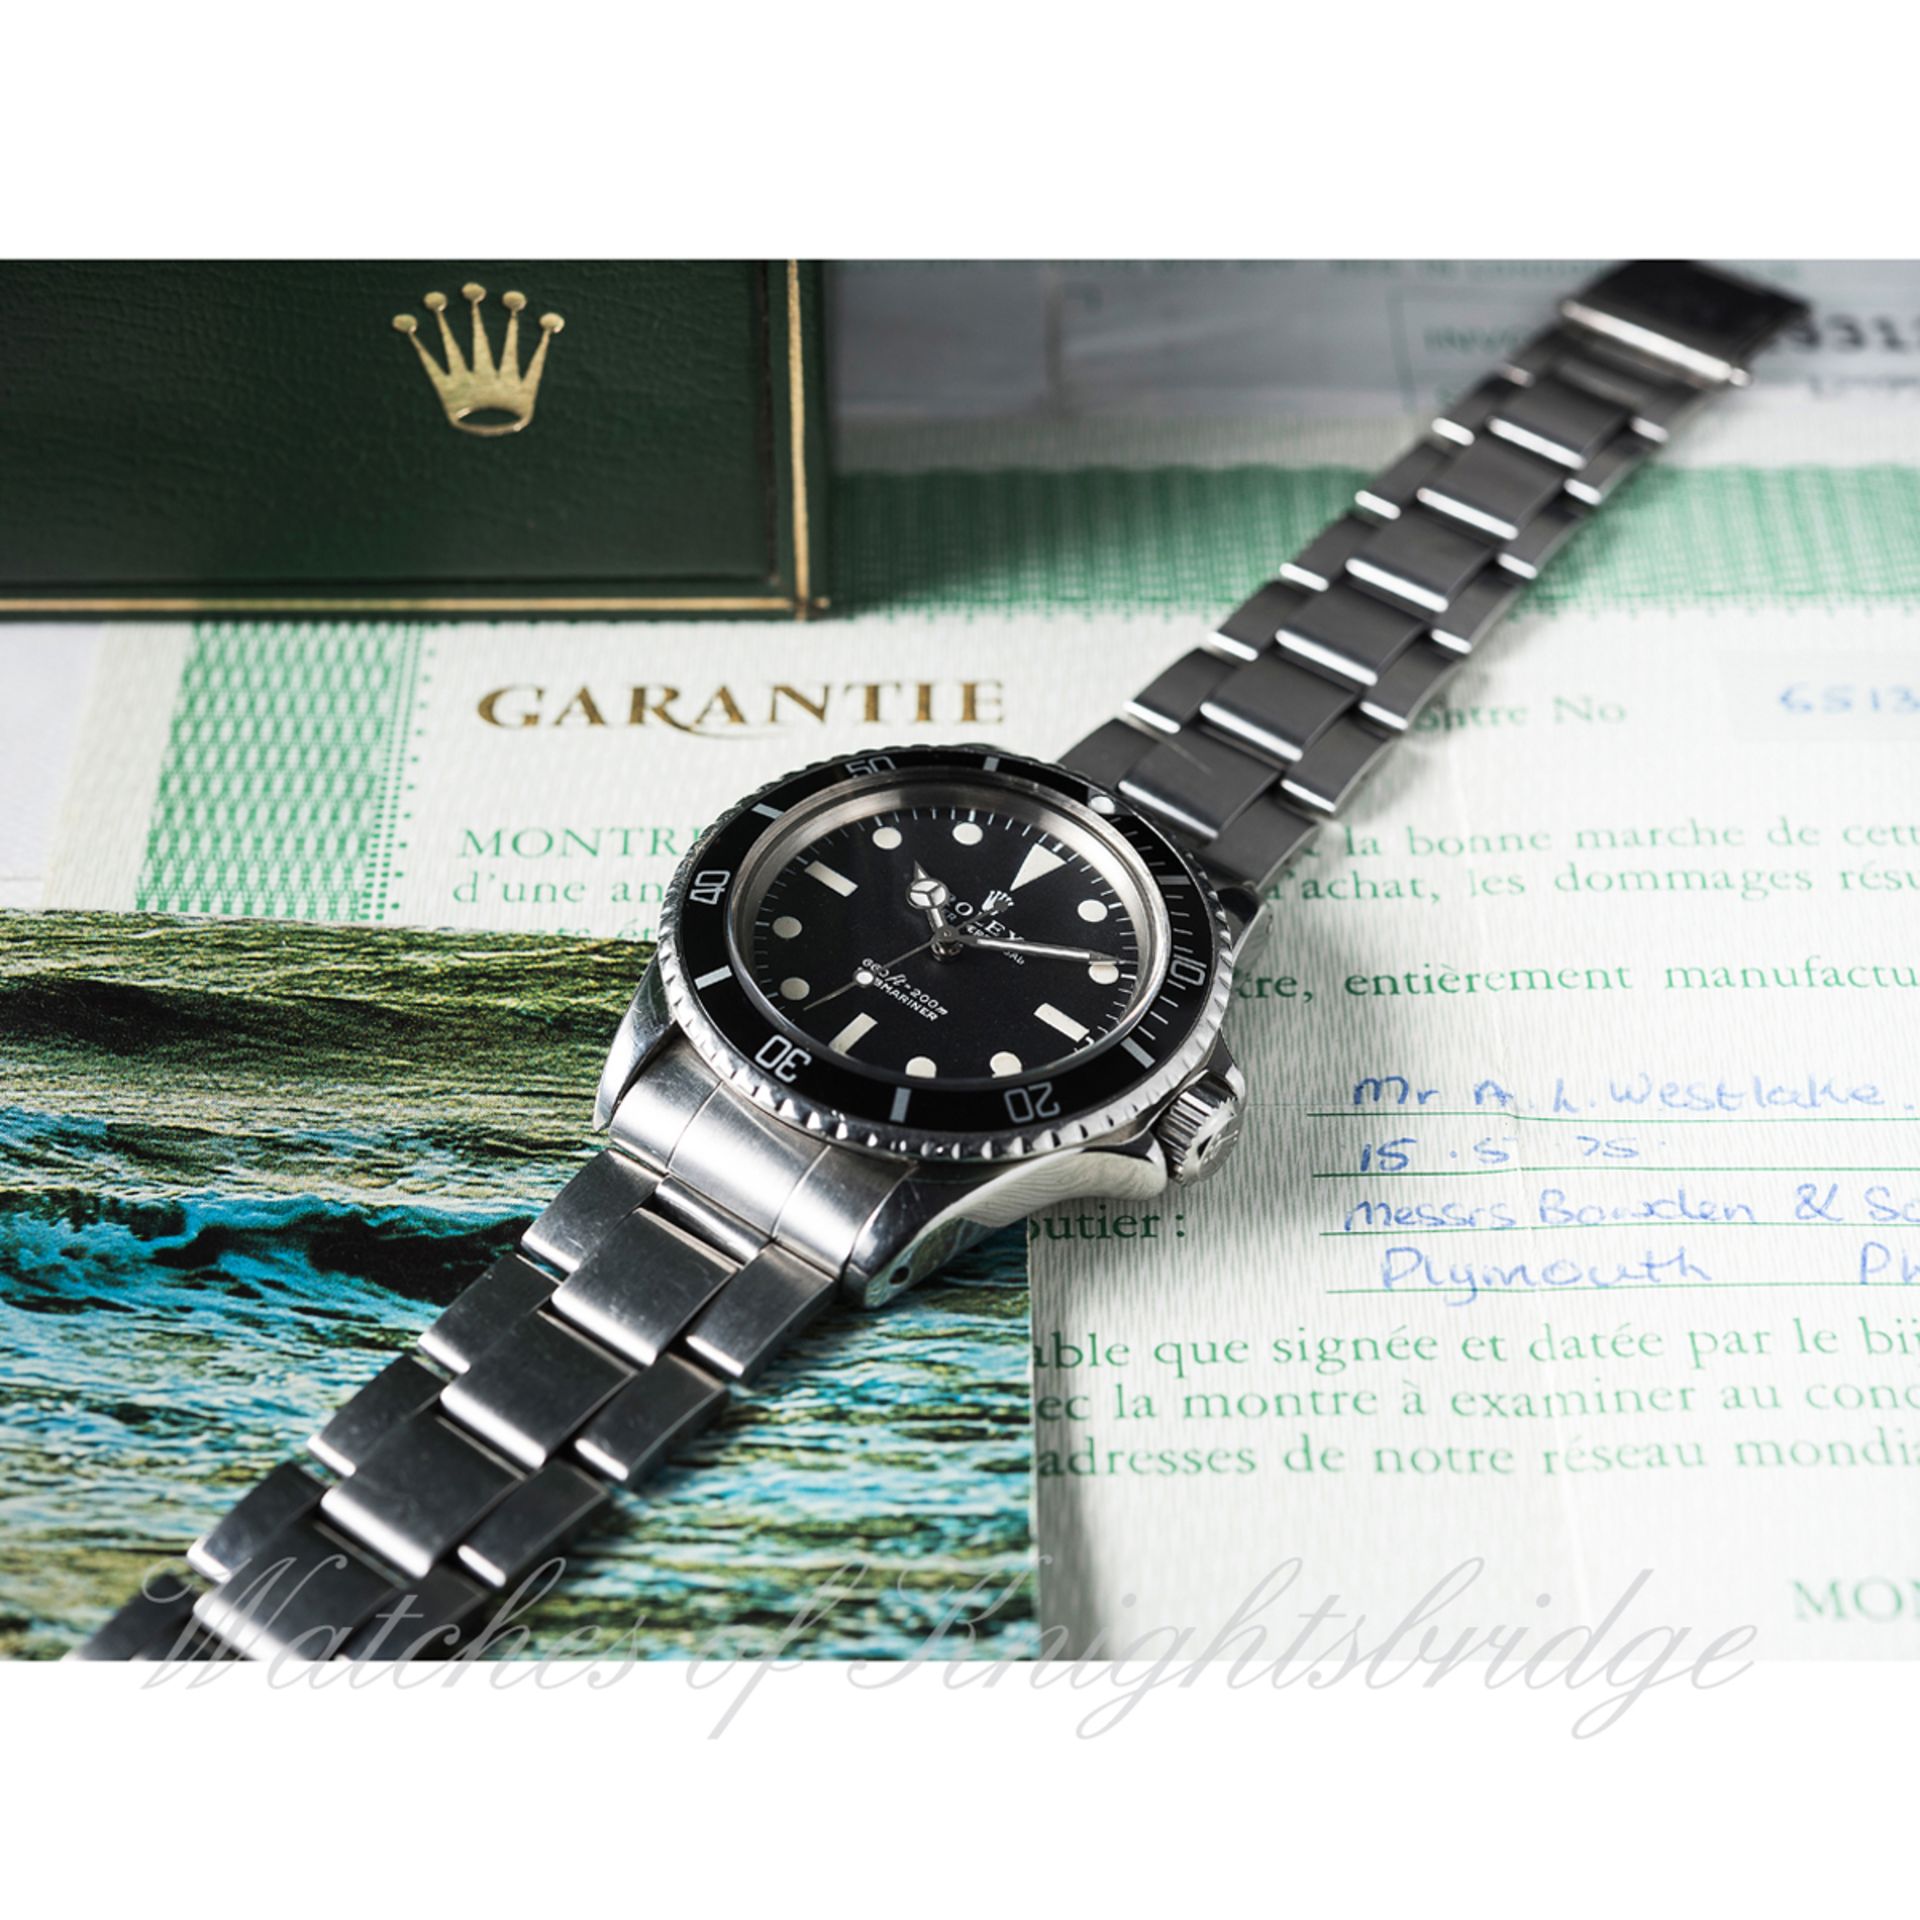 A GENTLEMAN'S STAINLESS STEEL ROLEX OYSTER PERPETUAL SUBMARINER BRACELET WATCH DATED 1975, REF. 5513 - Image 2 of 2